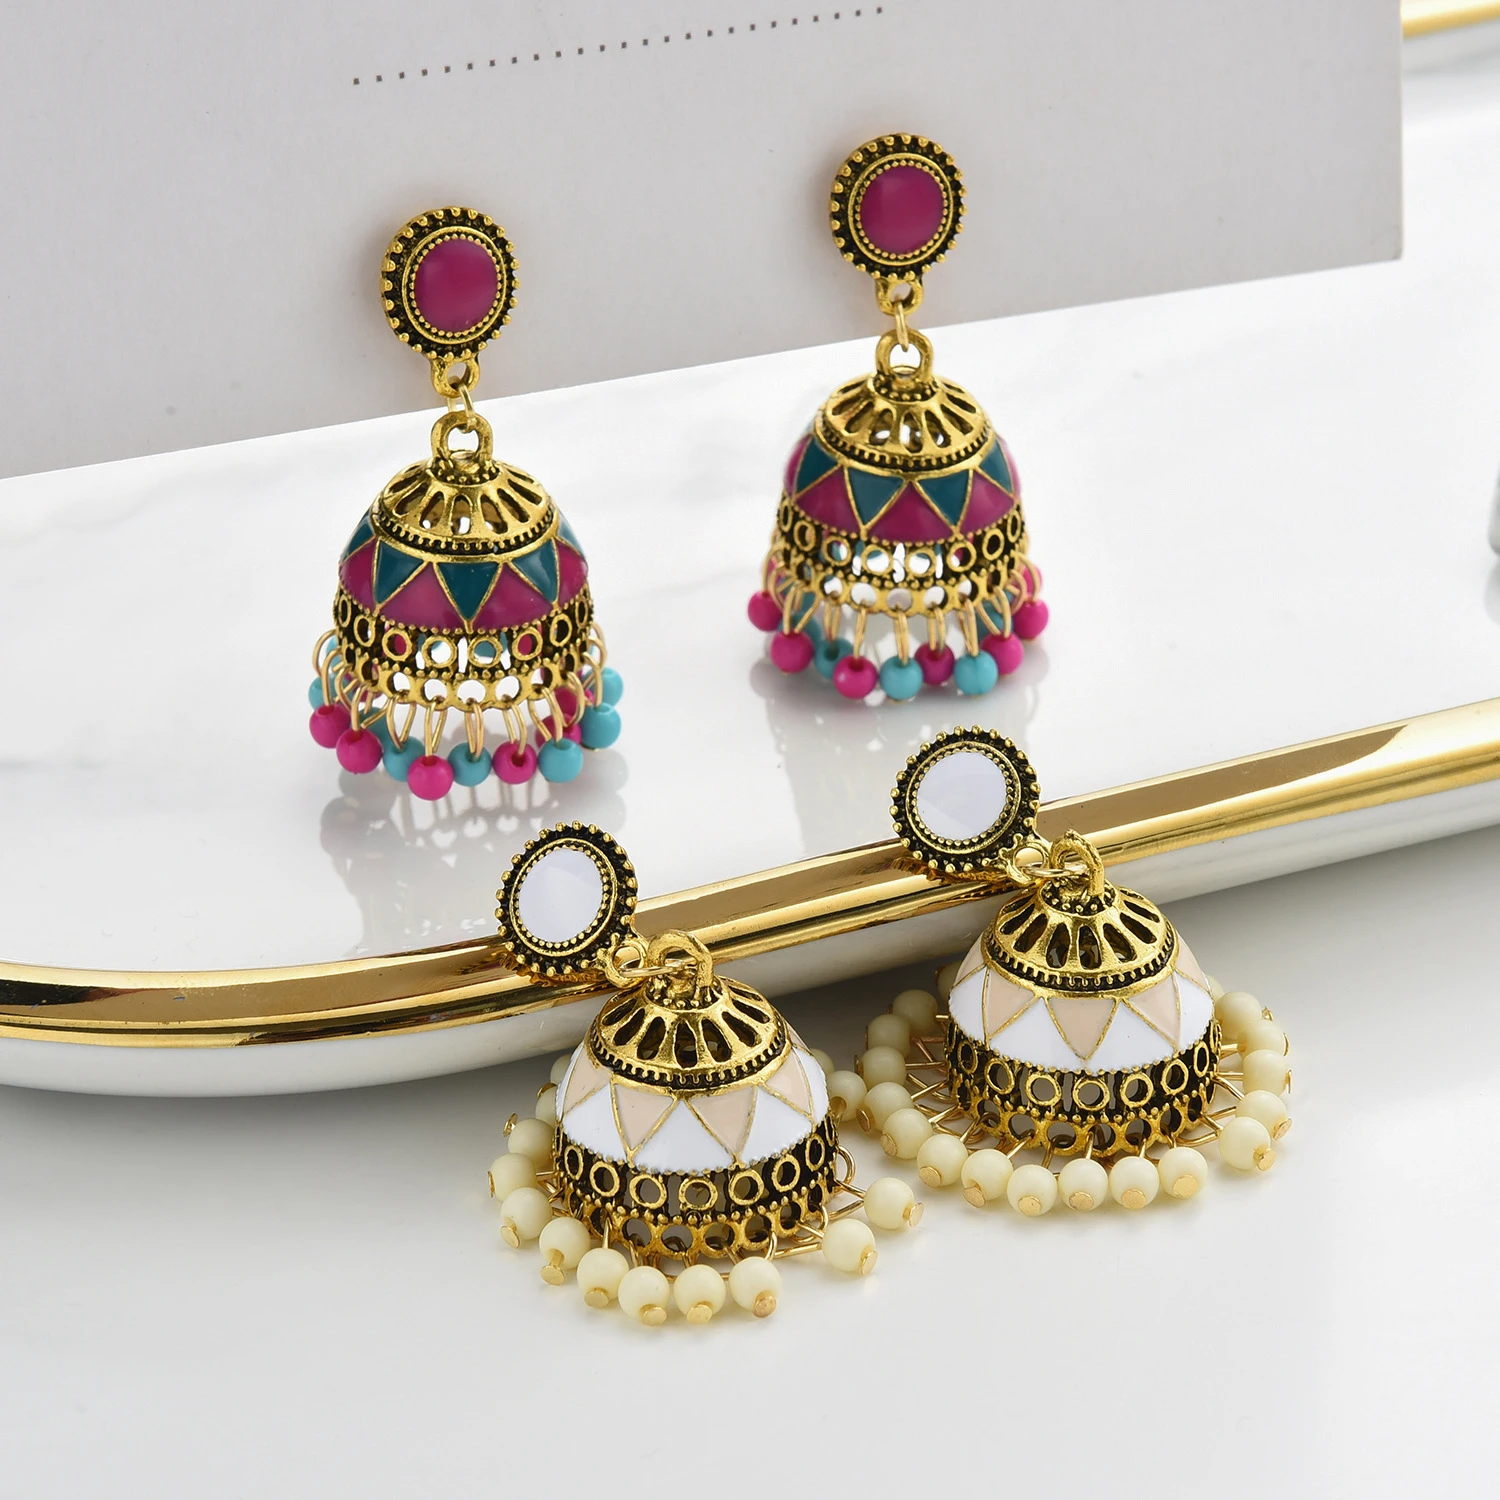 Girls Accessories New Hot Selling Popular Jewelry Bohemian Indian style alloy bell retro Palace Dripping Style National Earrings